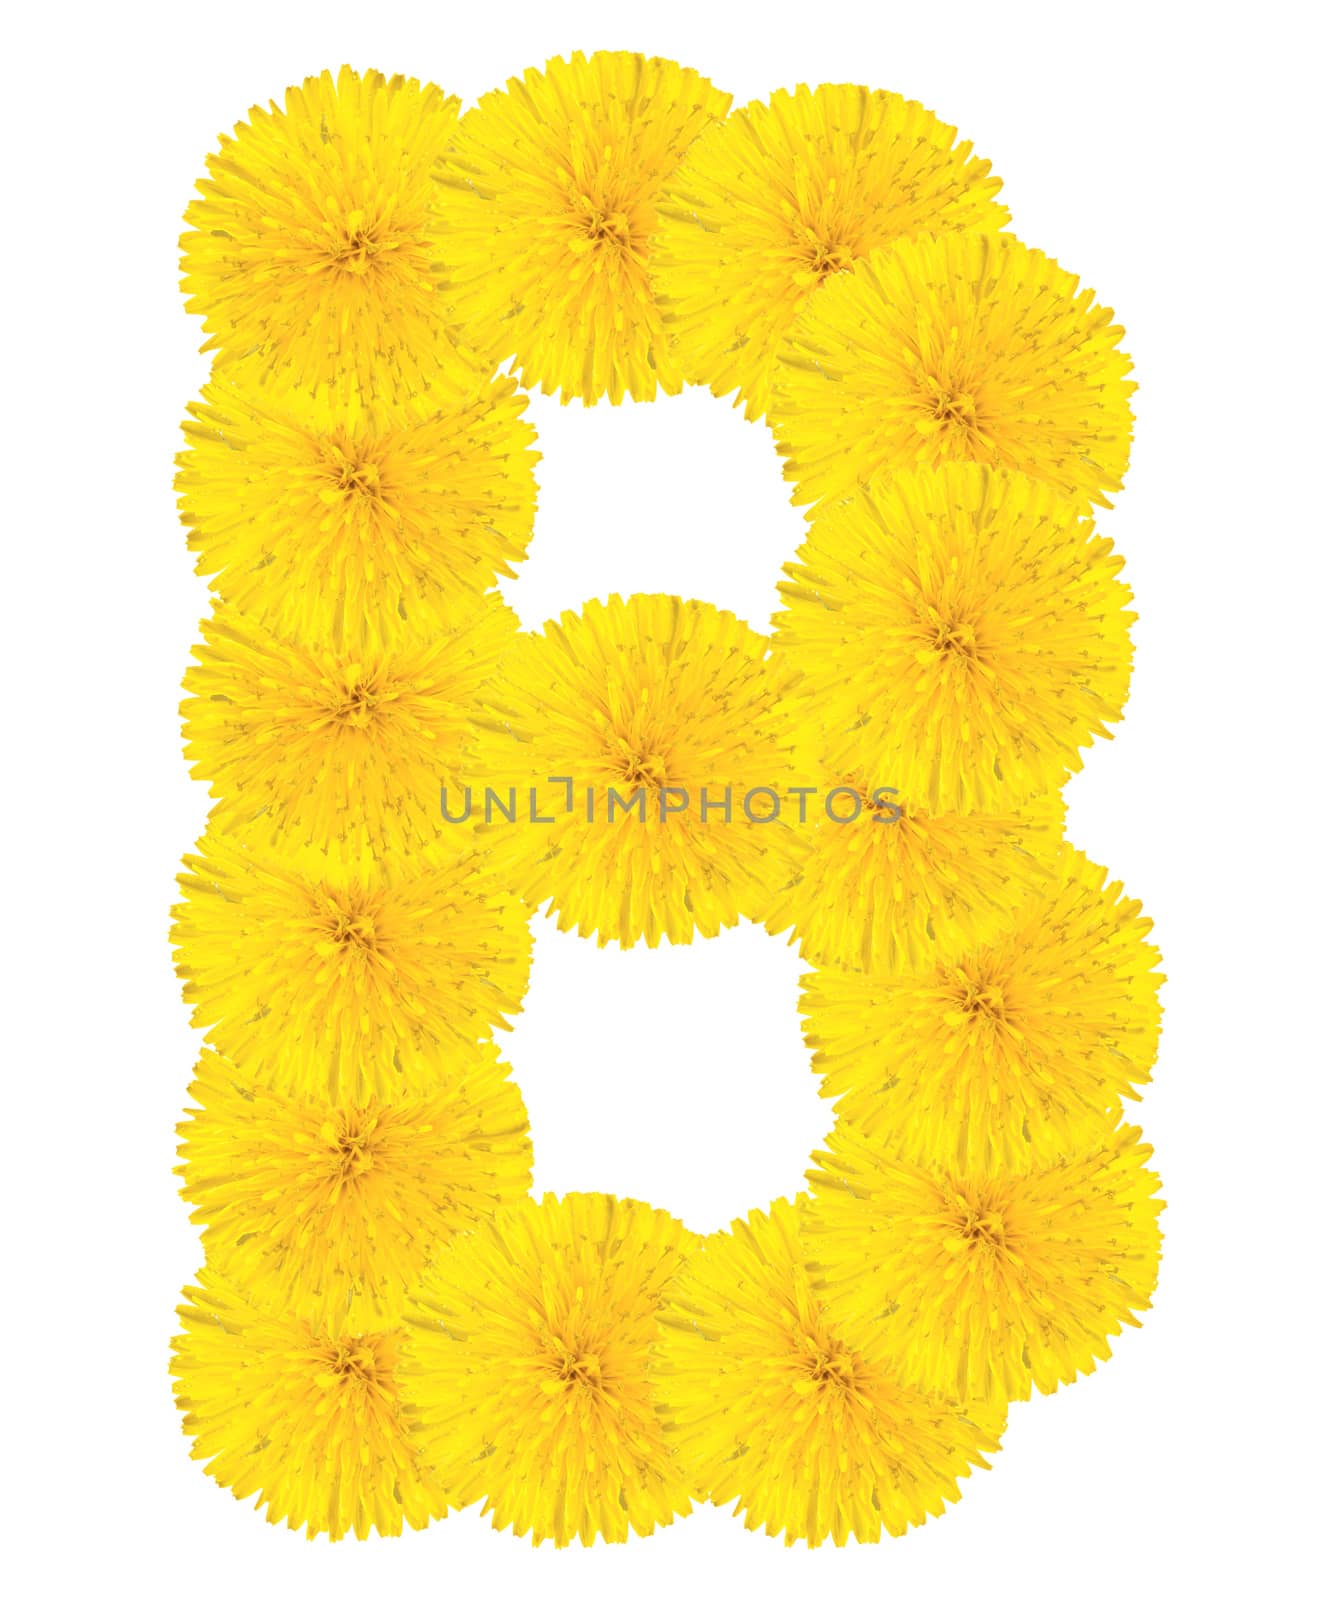 Letter B made from dandelions by Valengilda